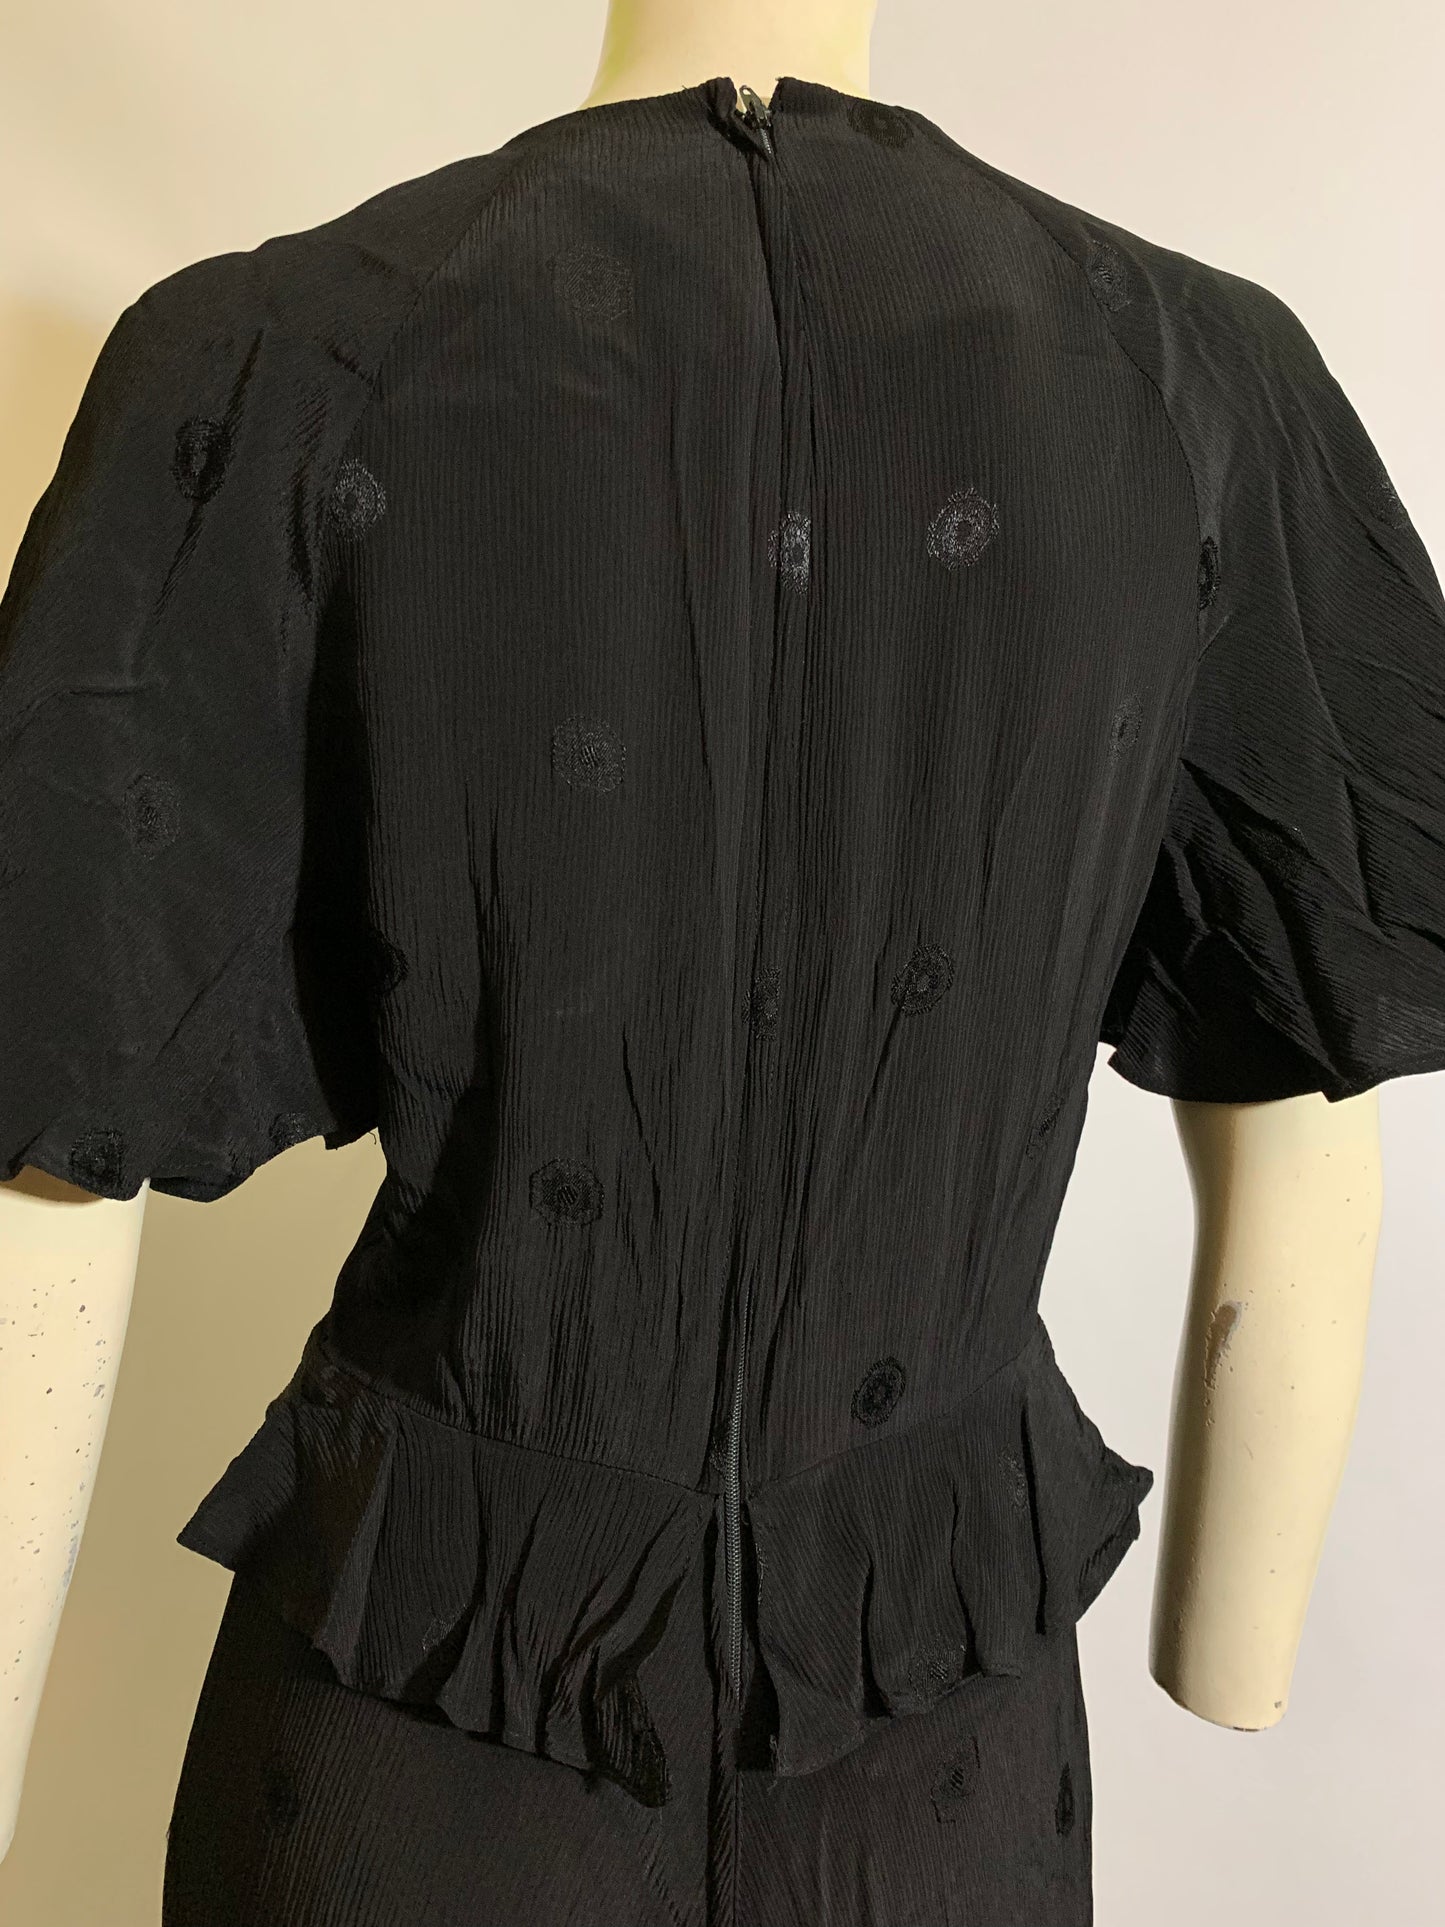 1930s Style Black Crepe Rayon Dress with Flutter Sleeves circa 1970s